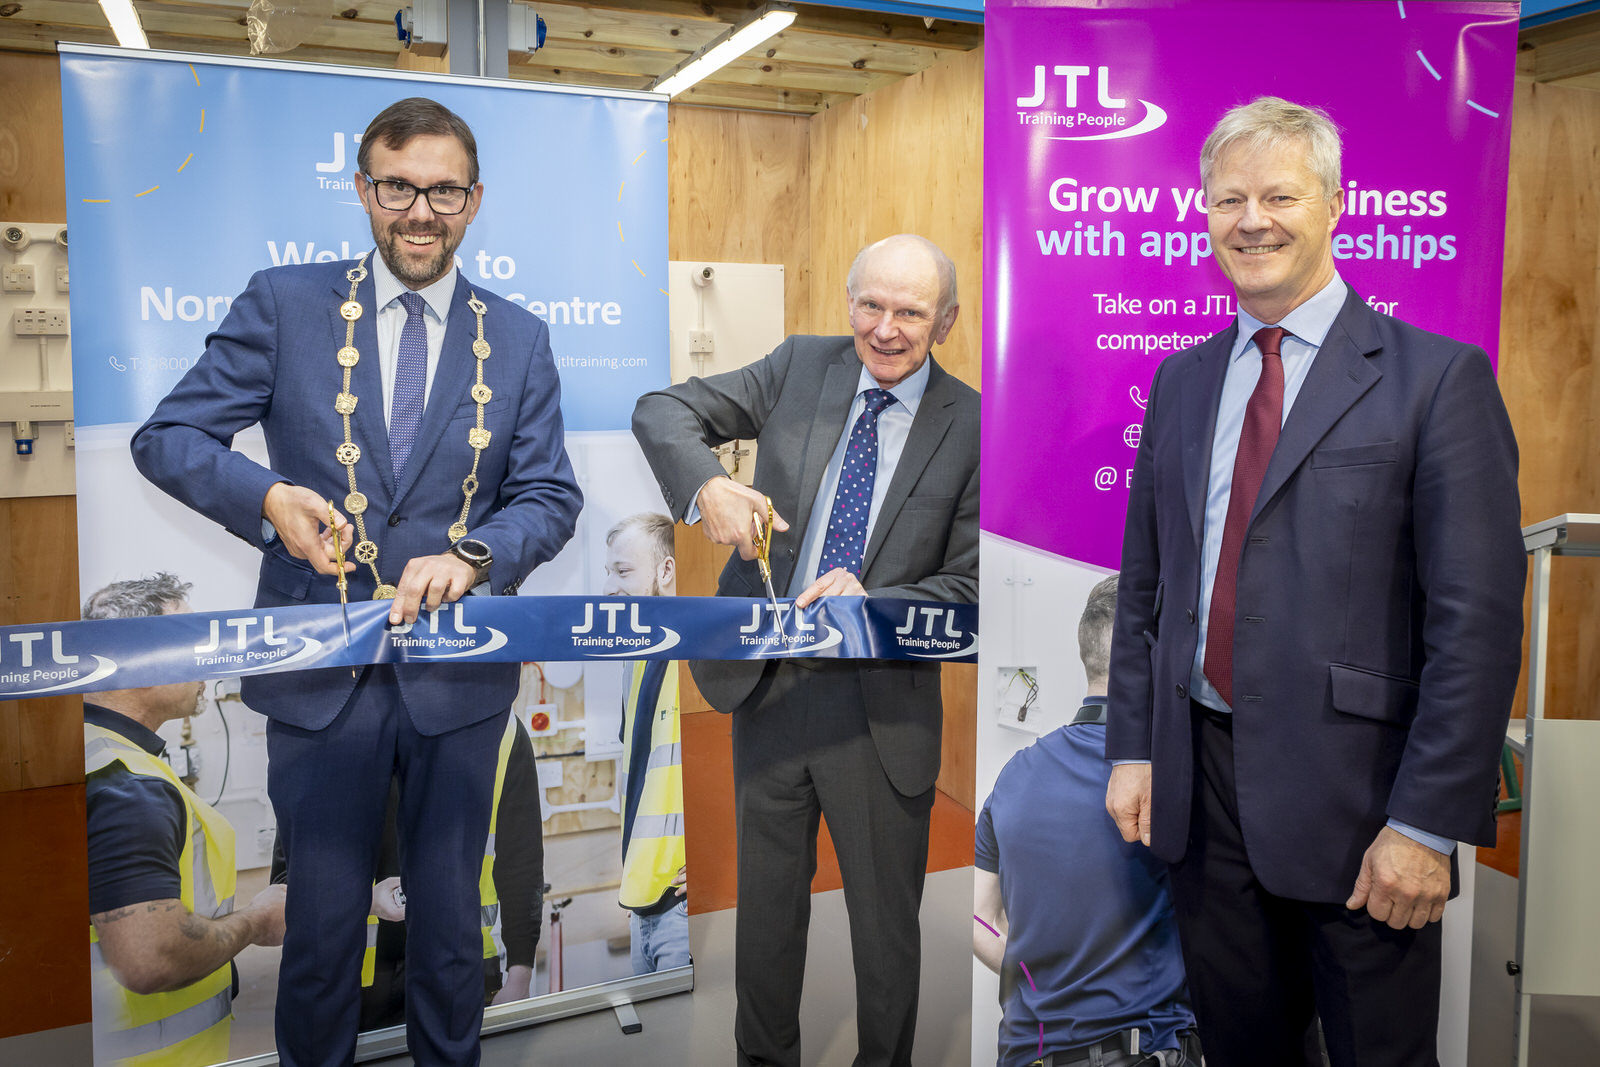 Norwich Lord Mayor and JTL Chairman opening Norwich Centre